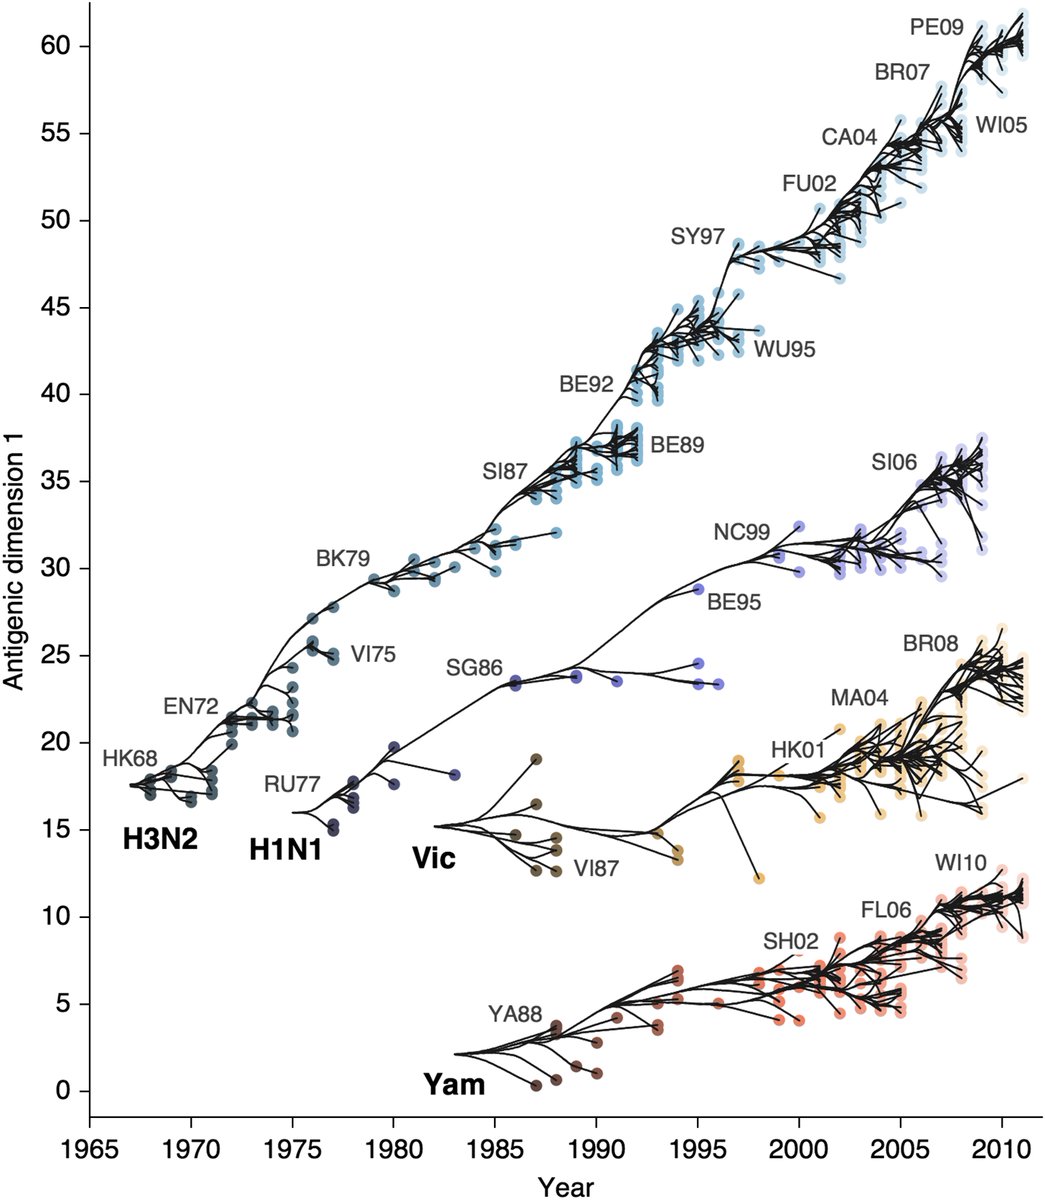 These rates of HA amino acid substitutions mirror experimentally determined rates of antigenic evolution. This is a figure from a 2014 paper by myself,  @arambaut and others ( https://bedford.io/papers/bedford-flux/) showing faster antigenic drift in H3N2 than H1N1 than B/Vic and B/Yam. 12/18